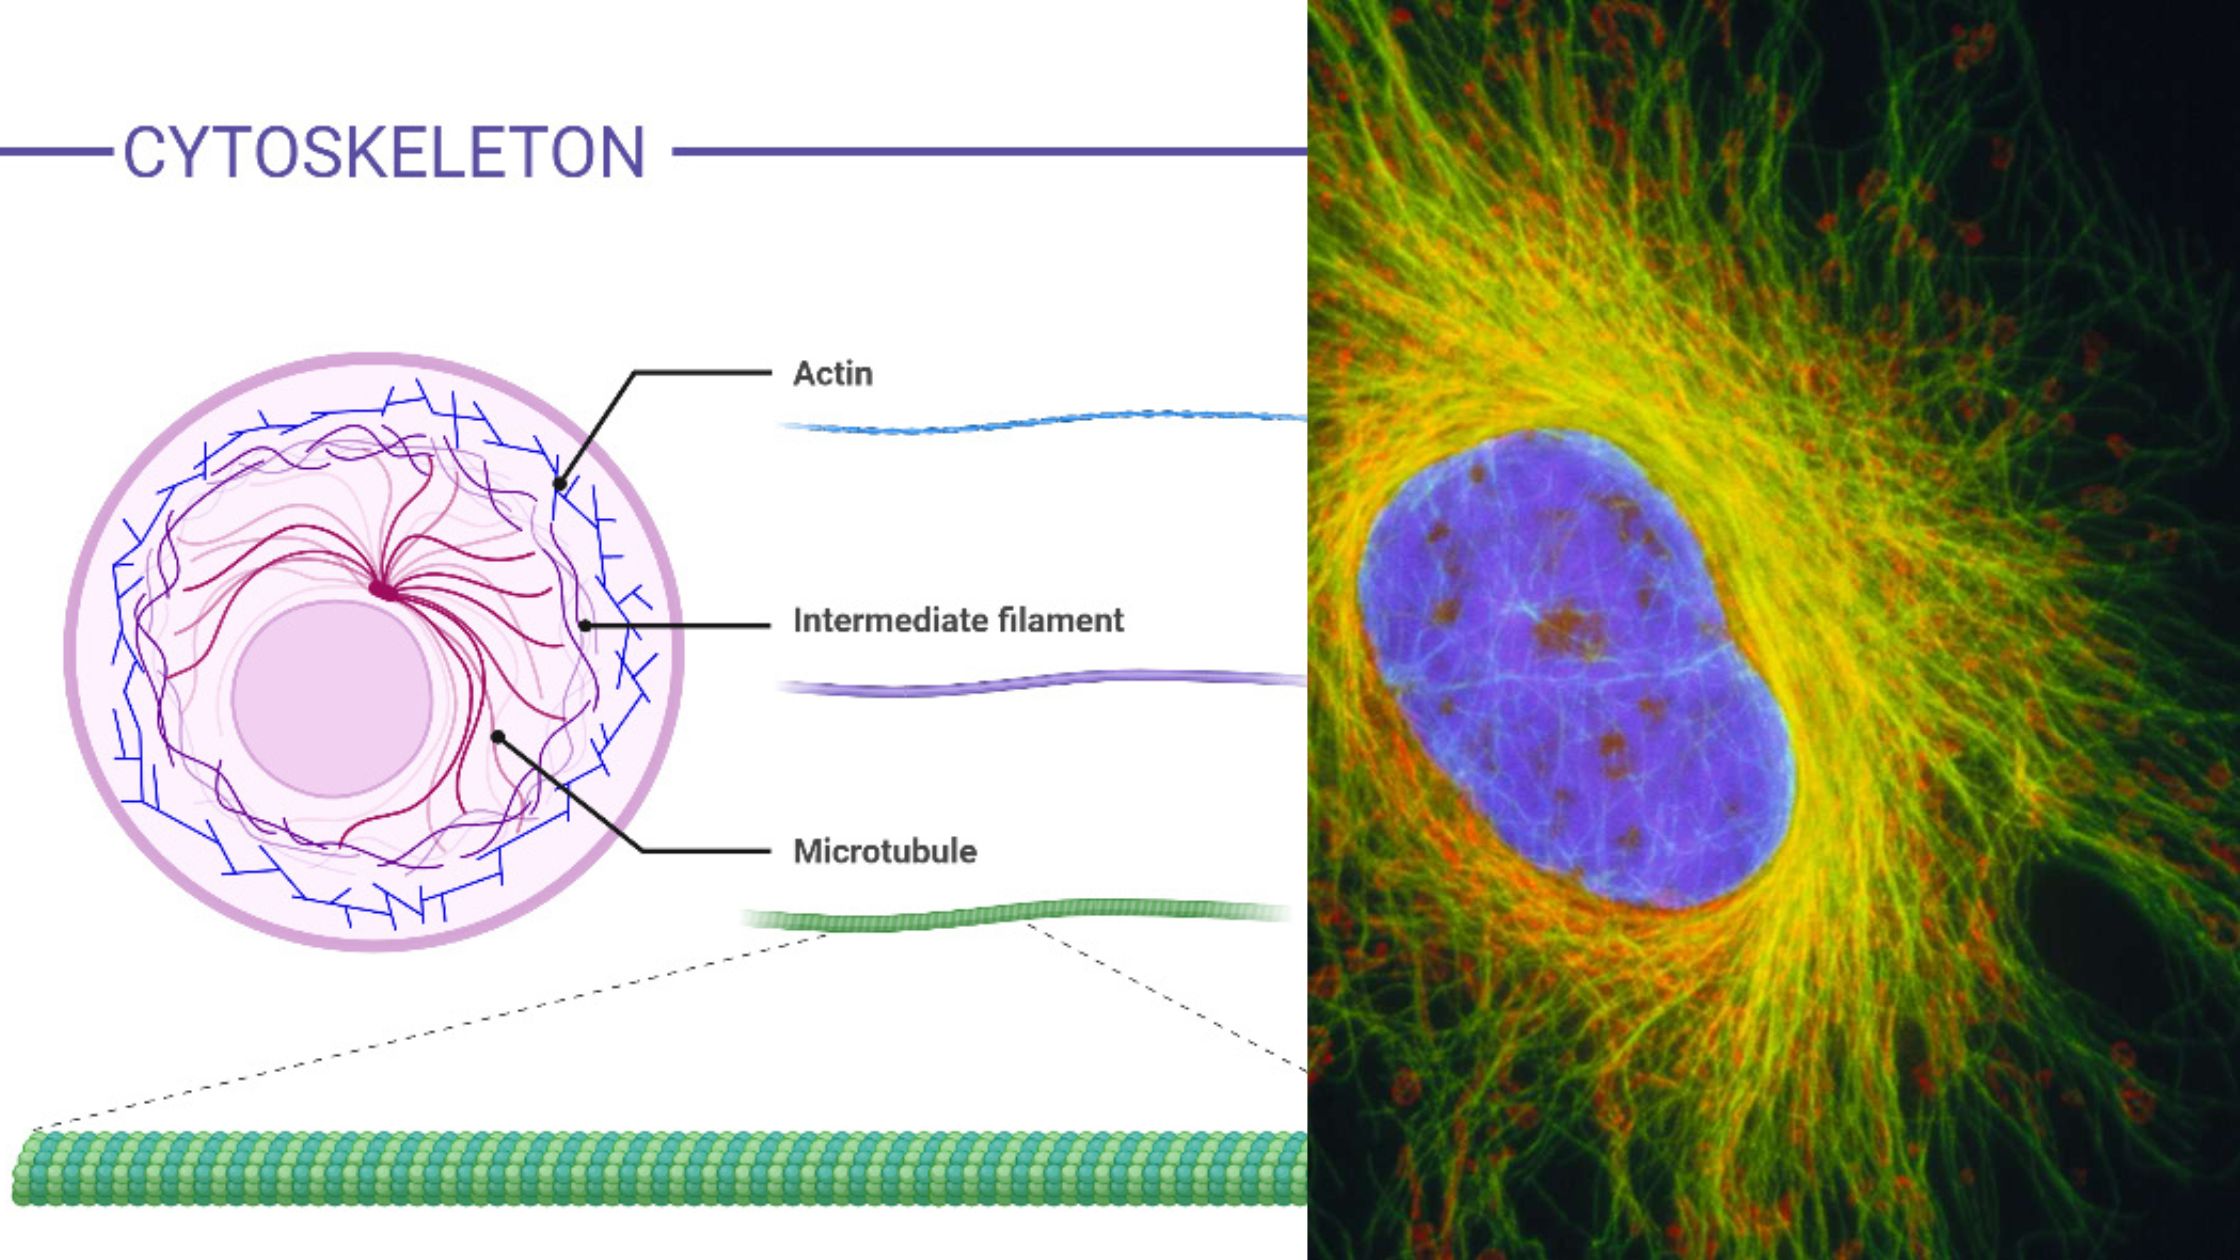 Cytoskeleton - Definition, Structure, Functions 